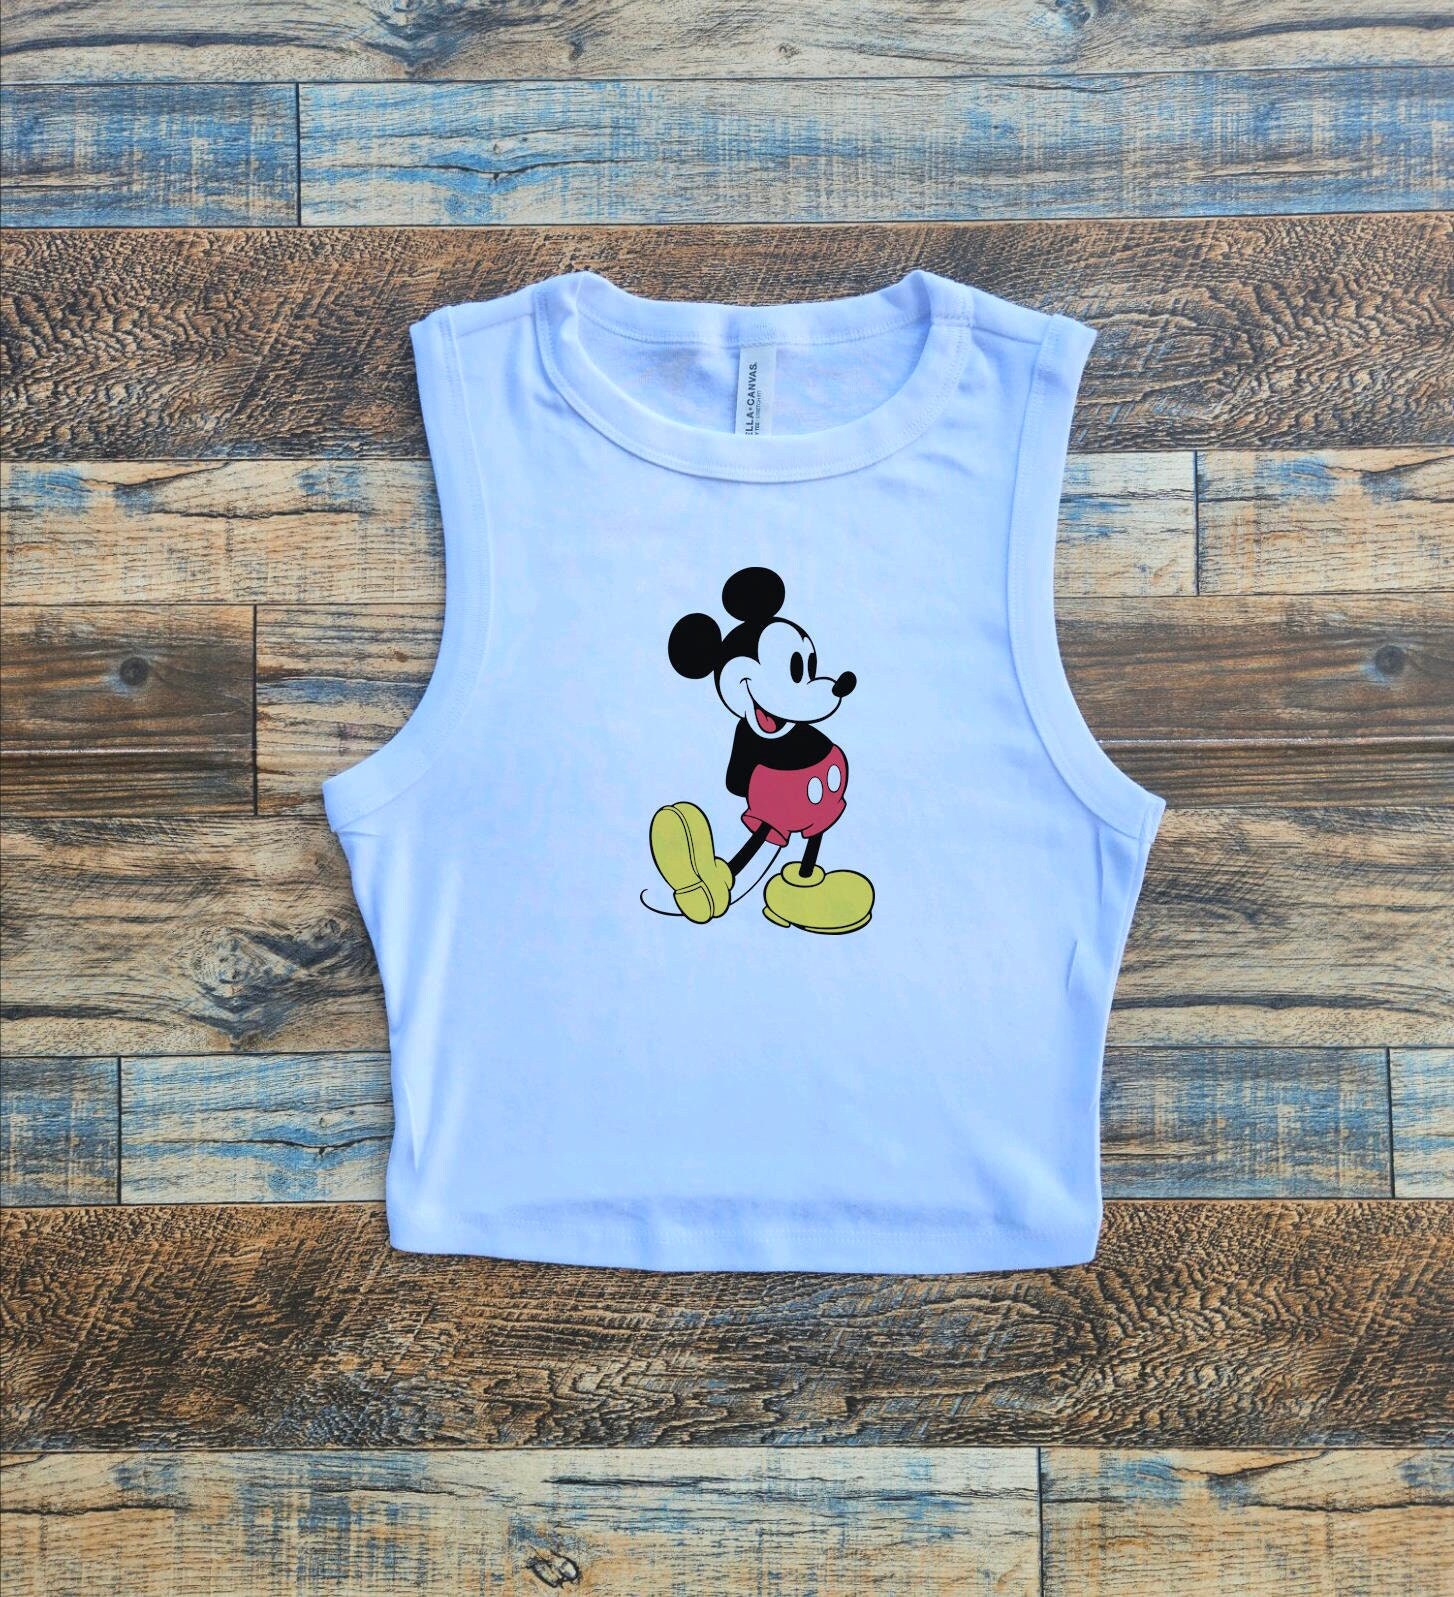 Mickey Crop Tank, Mickey Mouse Tank Top Womens, Retro mouse tshirt, Limited old school baby tee, Disney cute shirt